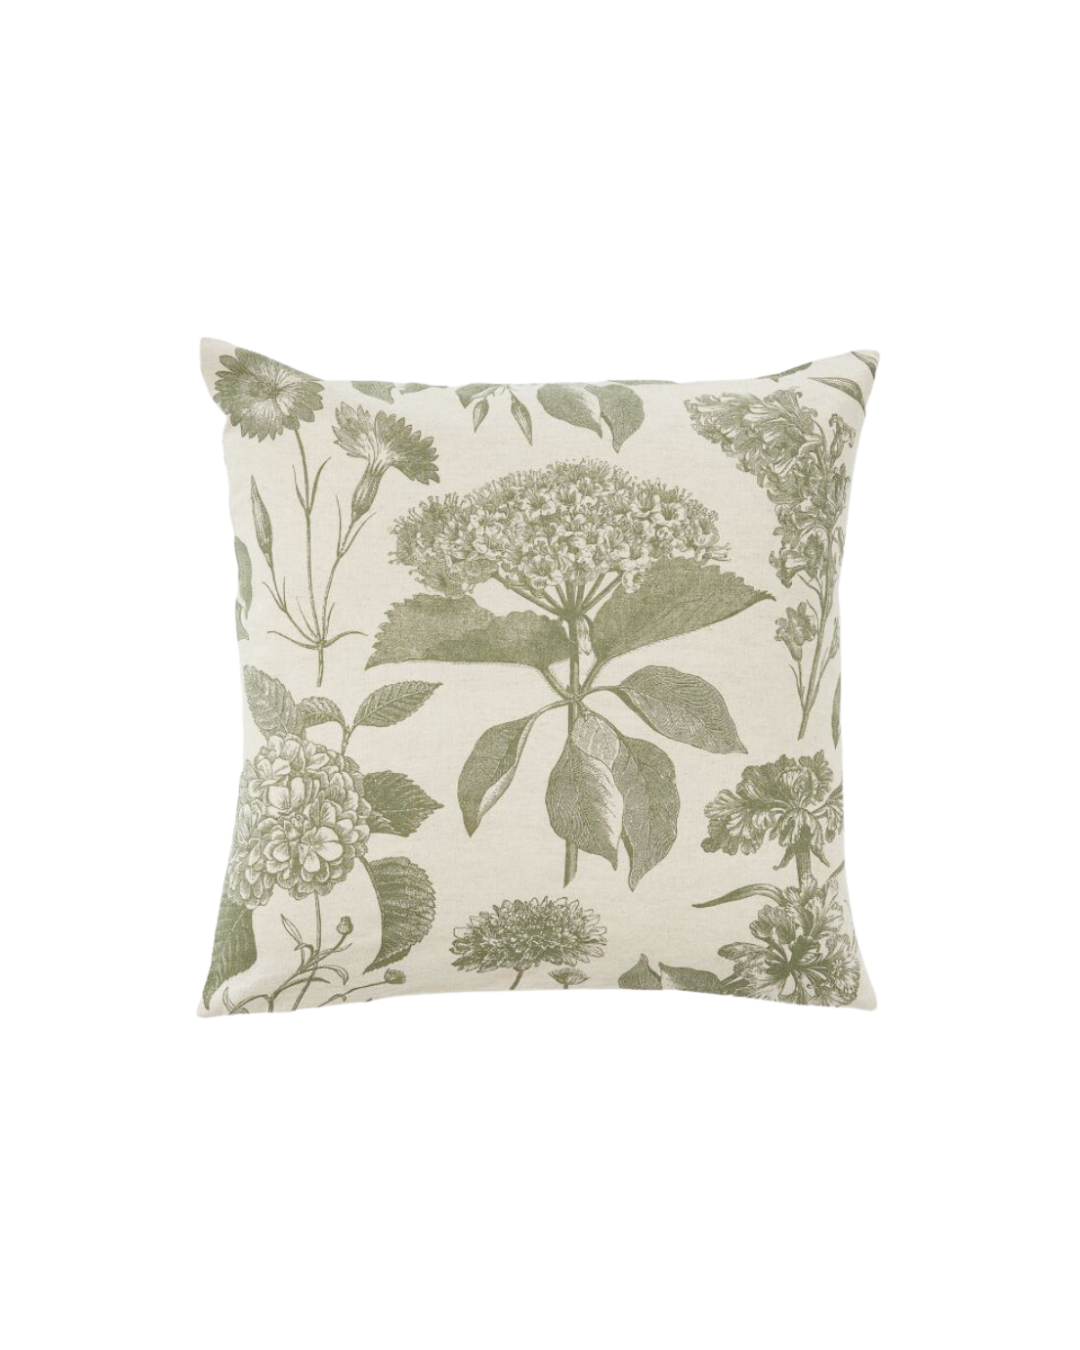 Patterned Cushion Cover - Khaki/green floral